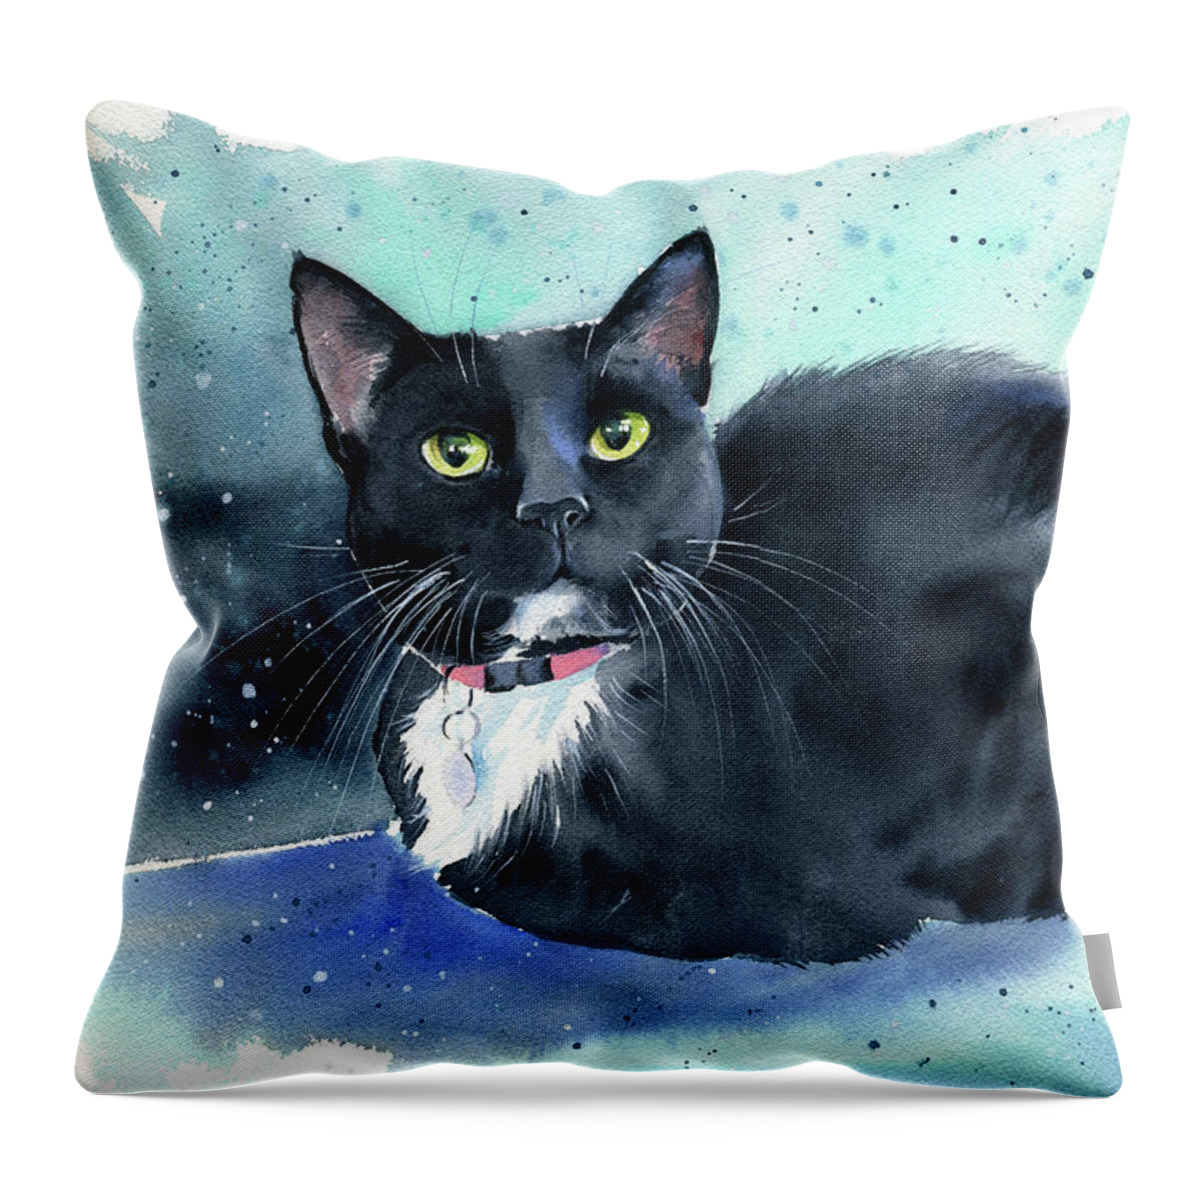 Cats Throw Pillow featuring the painting Oreo Tuxedo Cat Painting by Dora Hathazi Mendes